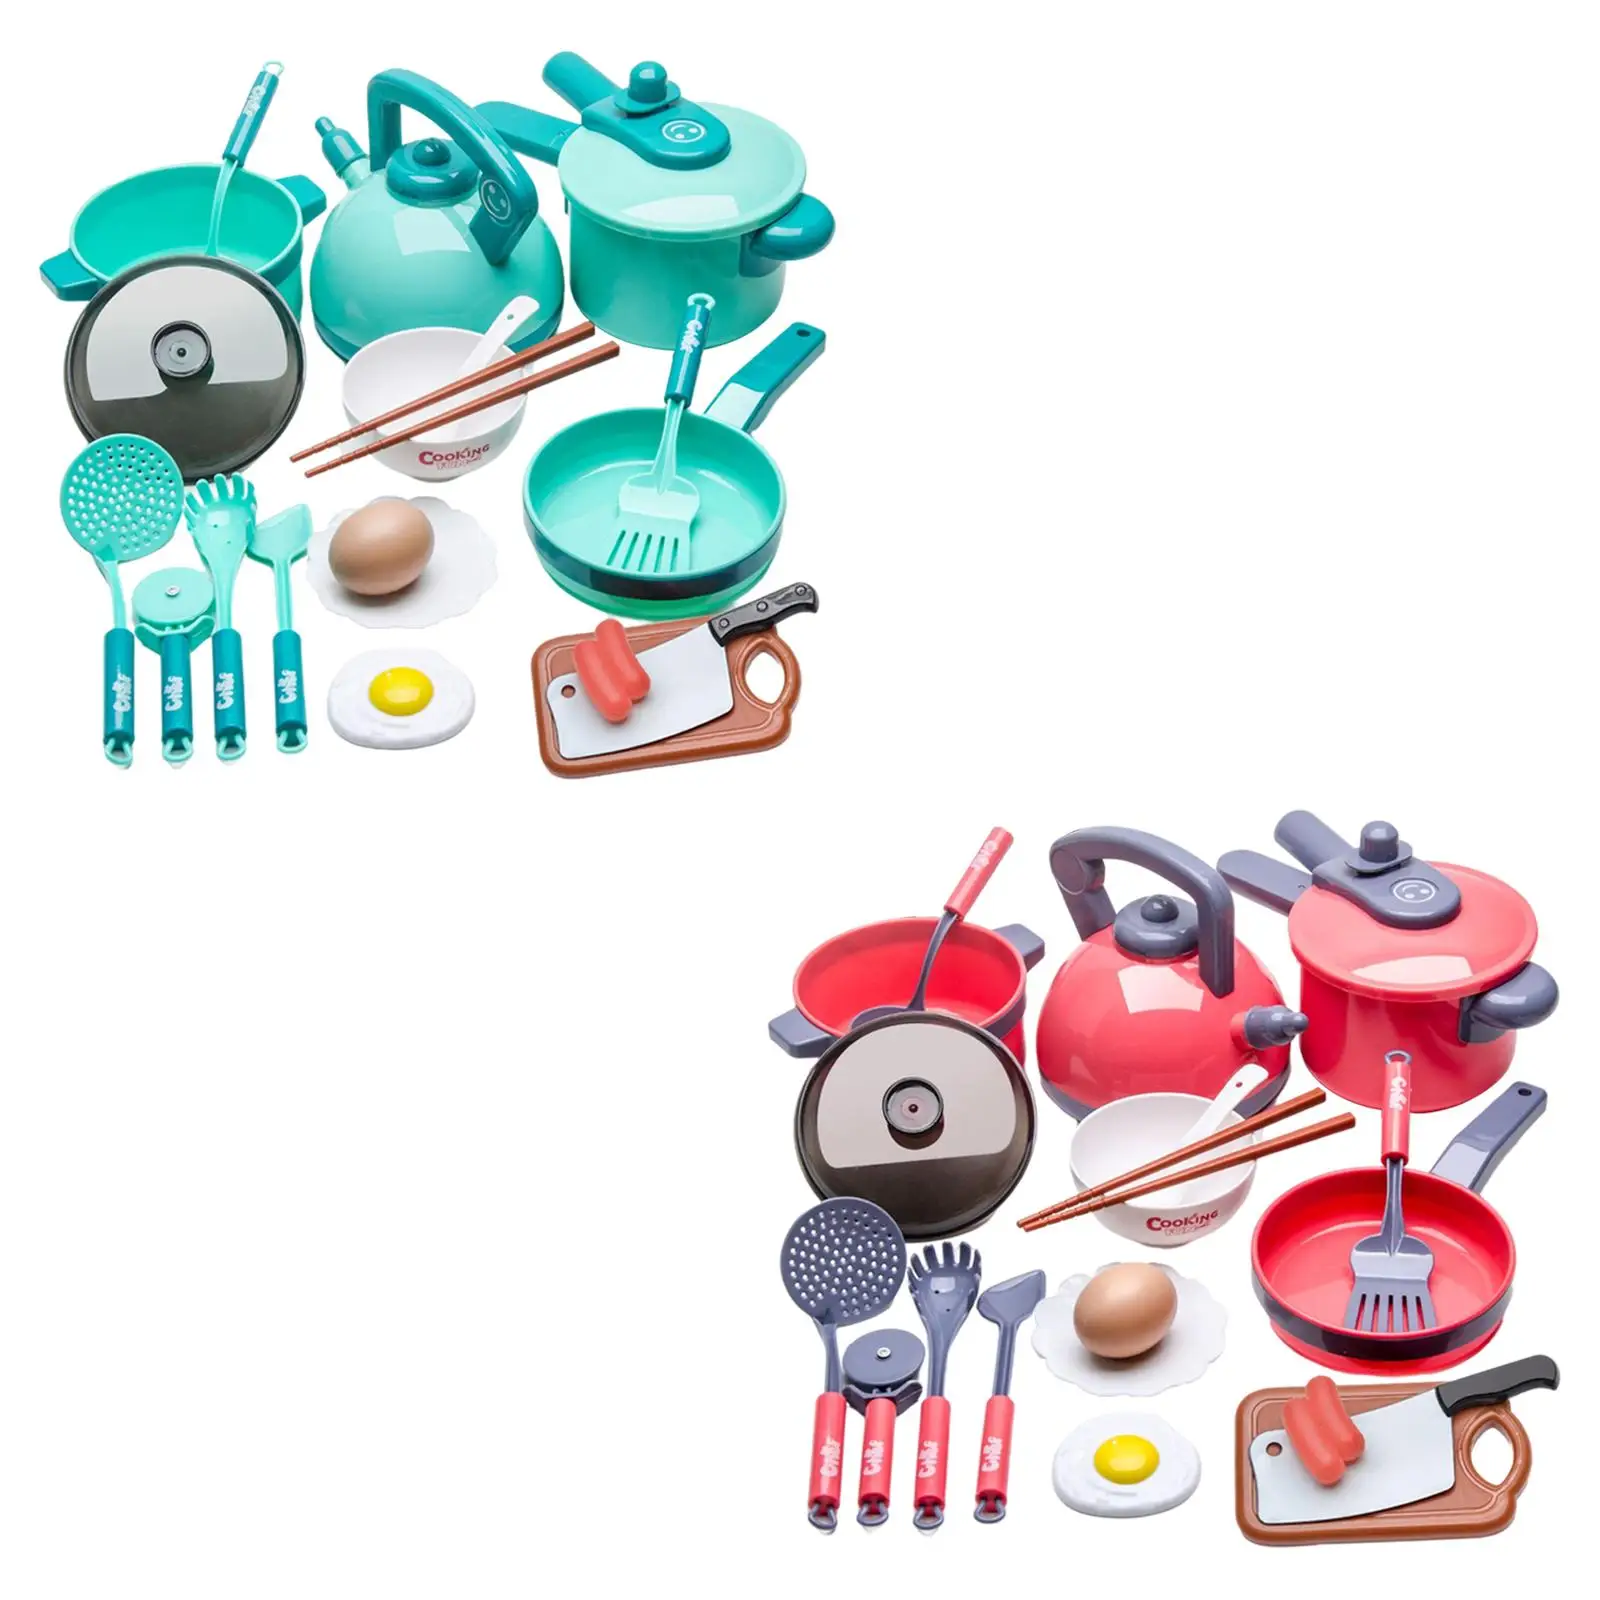 20Pcs/Set Kids Kitchen Pretend Play Pot and Pans Sets Toys Cookware Educational Toys for Toddlers Baby